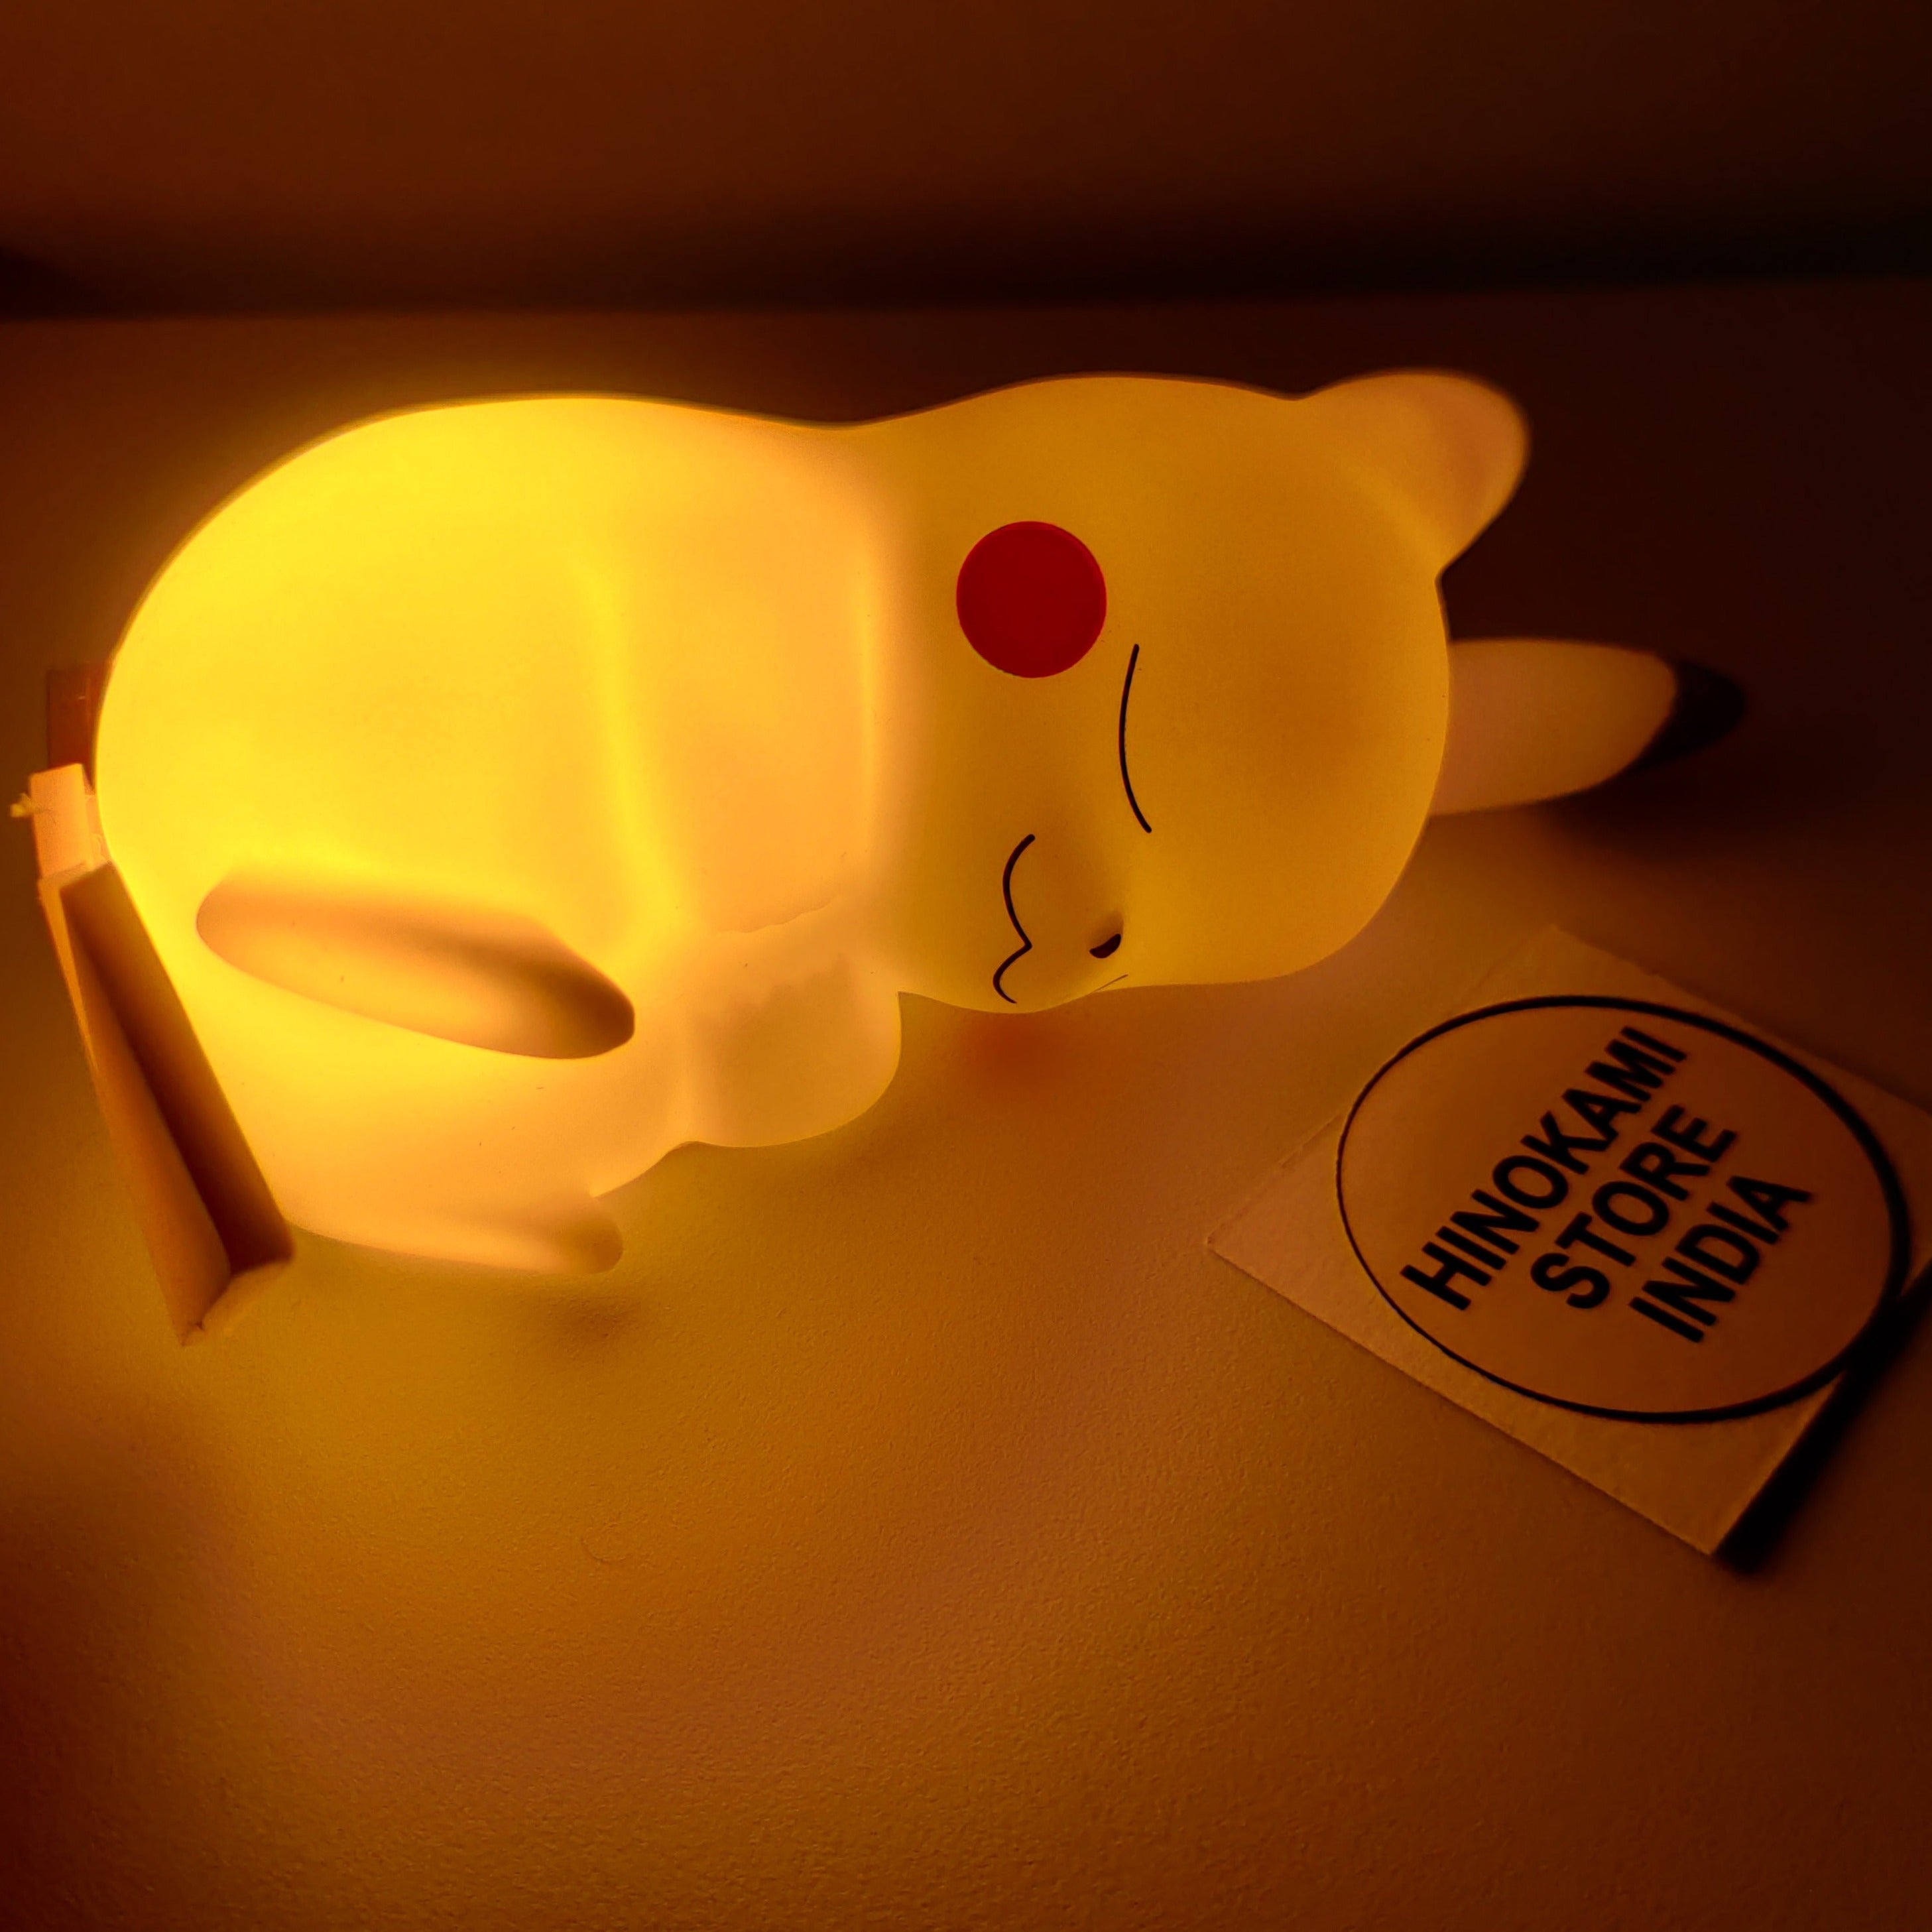 Pikachu lamp - free keychain worth ₹249 with prepaid order of lamp